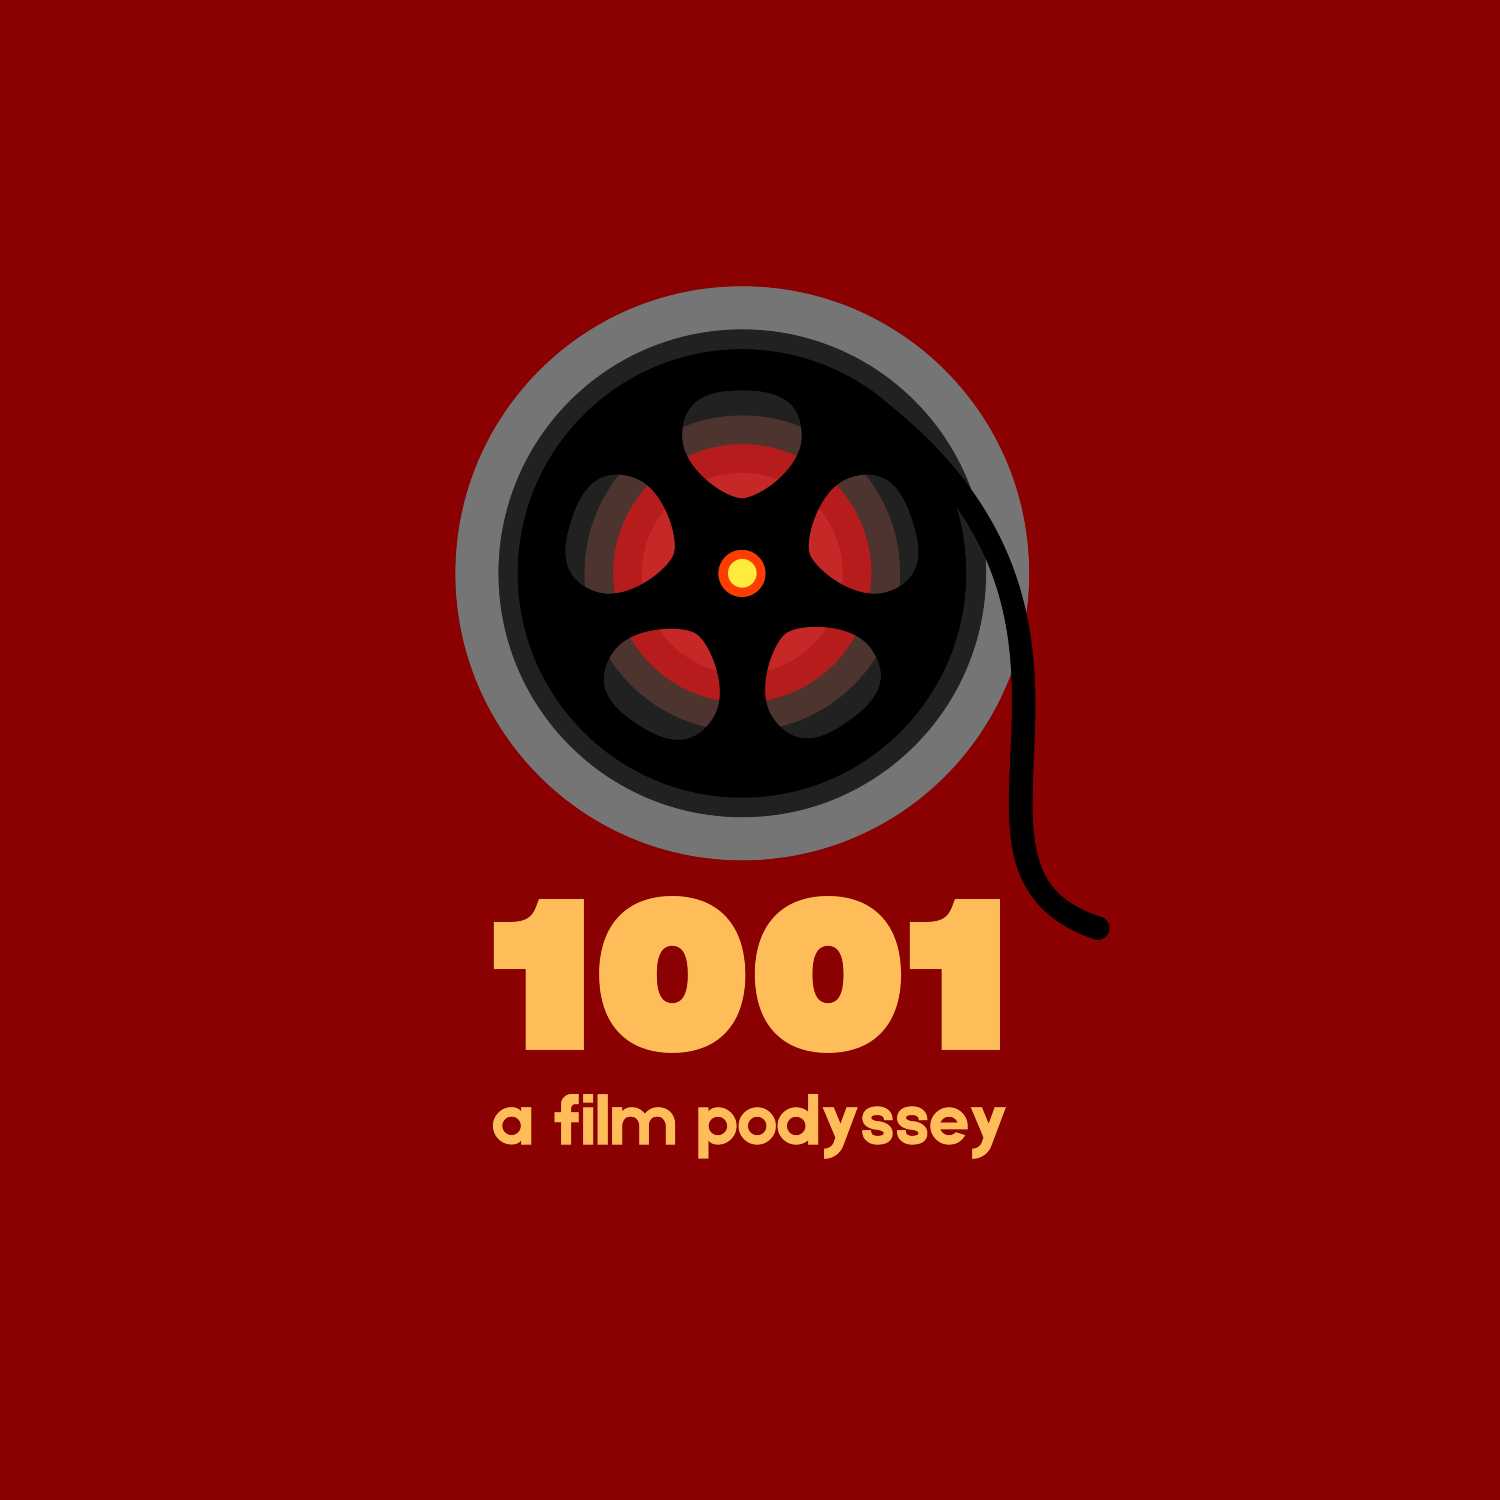 1001: A Film Podyssey | Top 3 'Trips Gone Wrong' | An American Werewolf in London (1981)